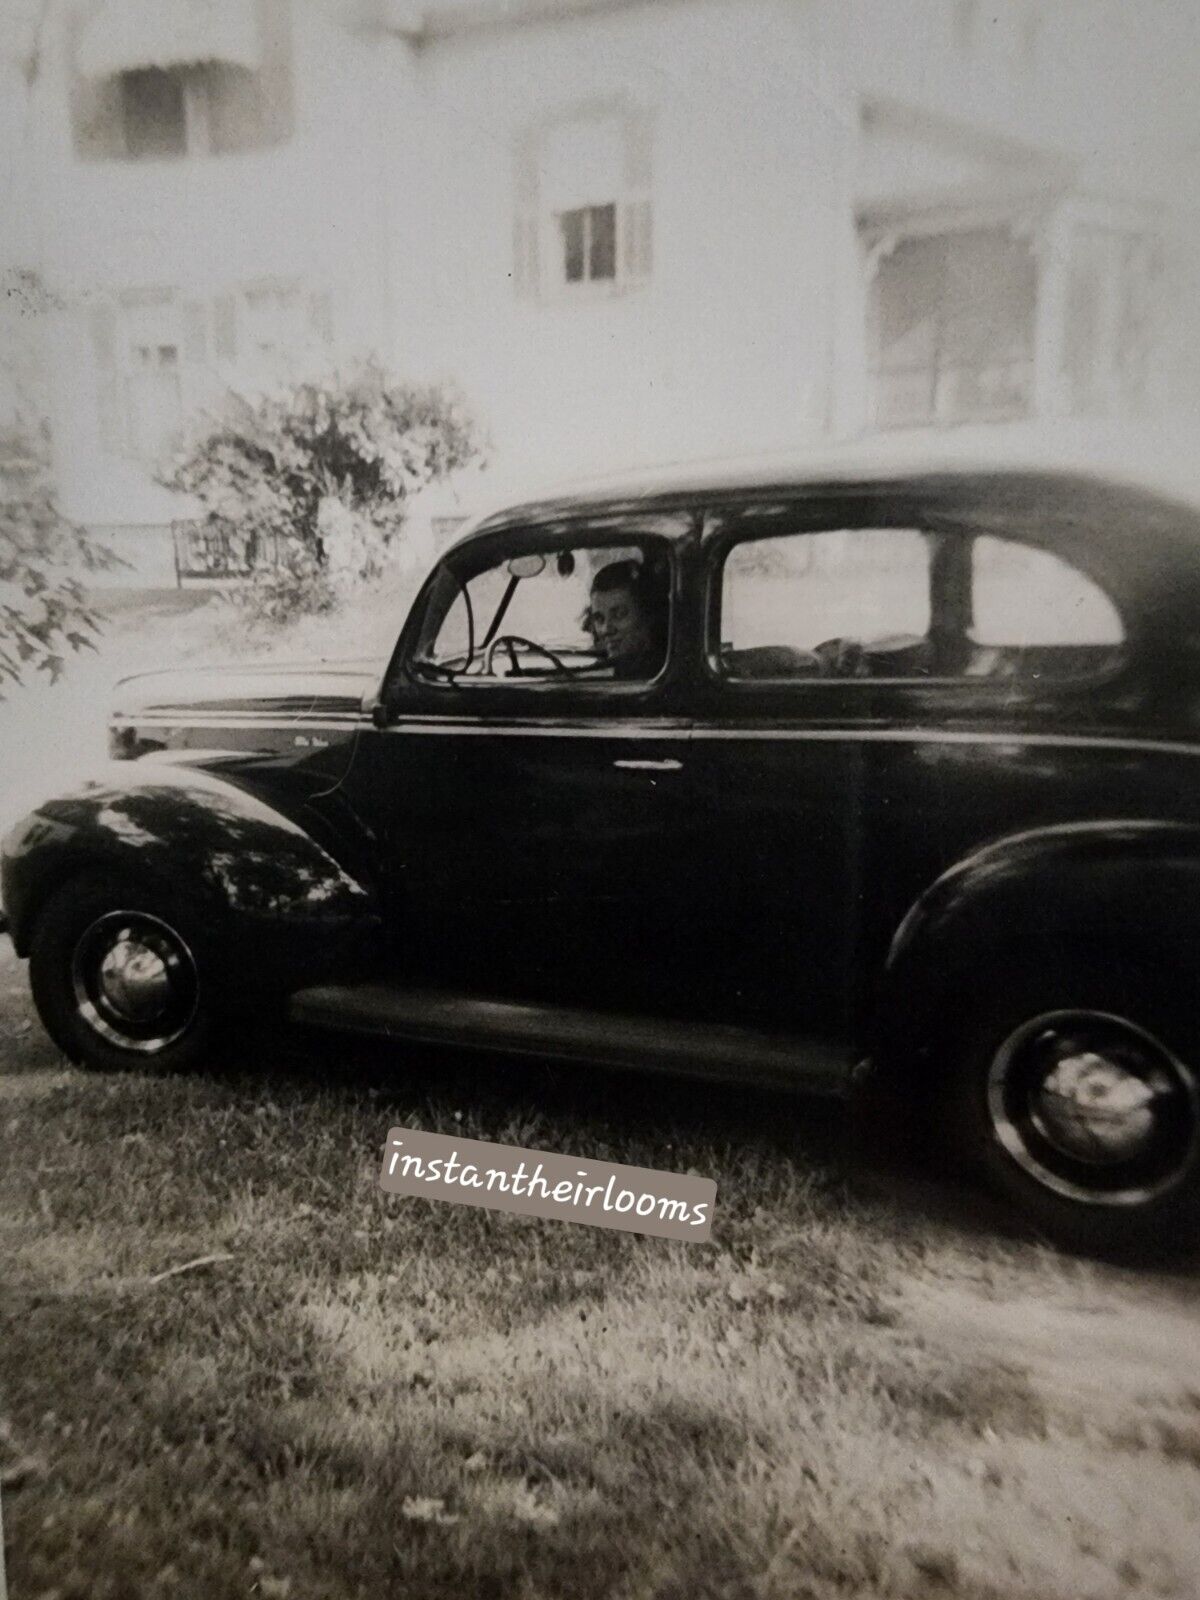 1940 V8 FORD CAR Identified Lady Vintage FOUND PHOTO Black And White Snapshot L1